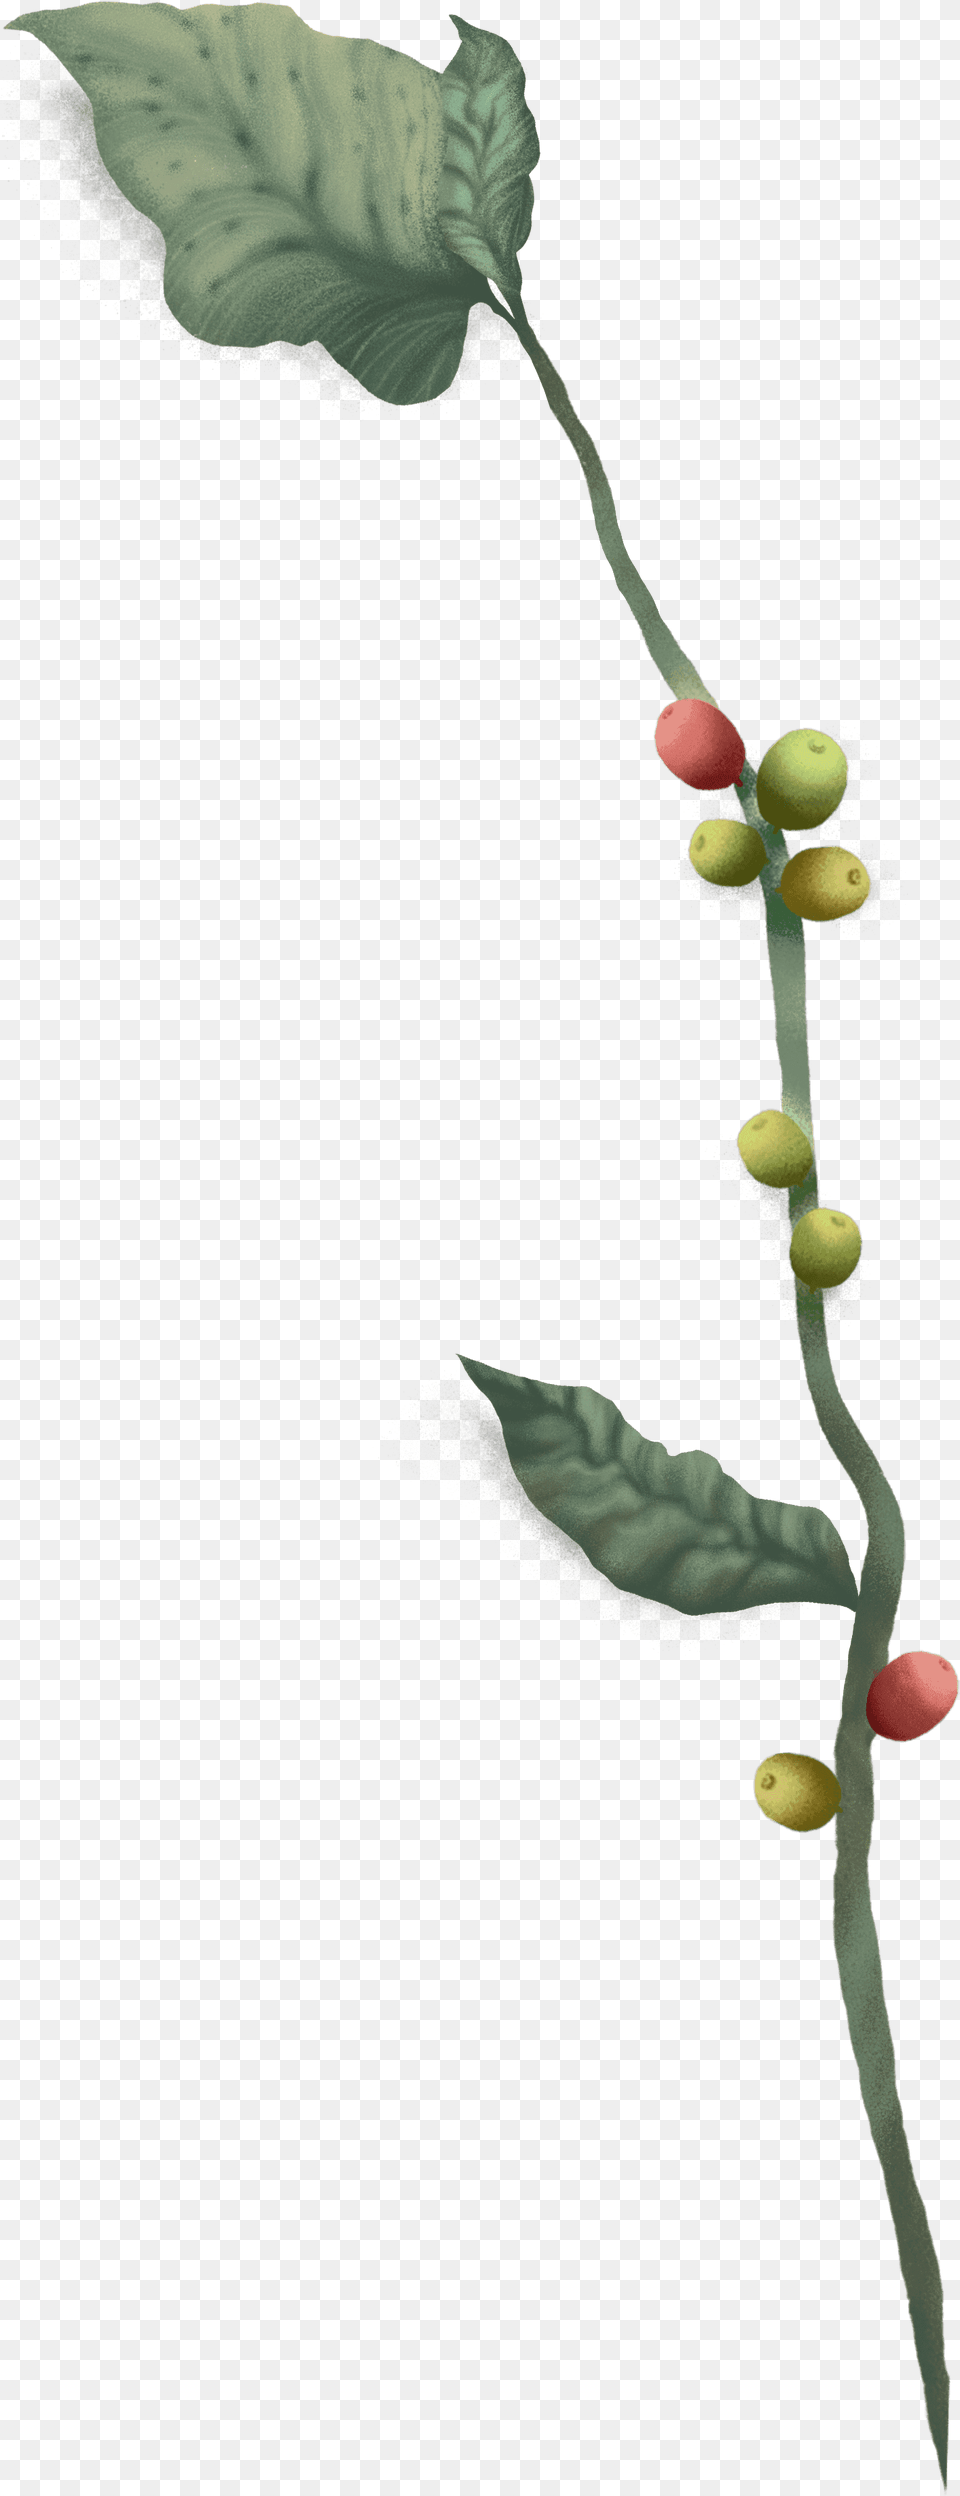 Twig, Plant, Sprout, Bud, Flower Png